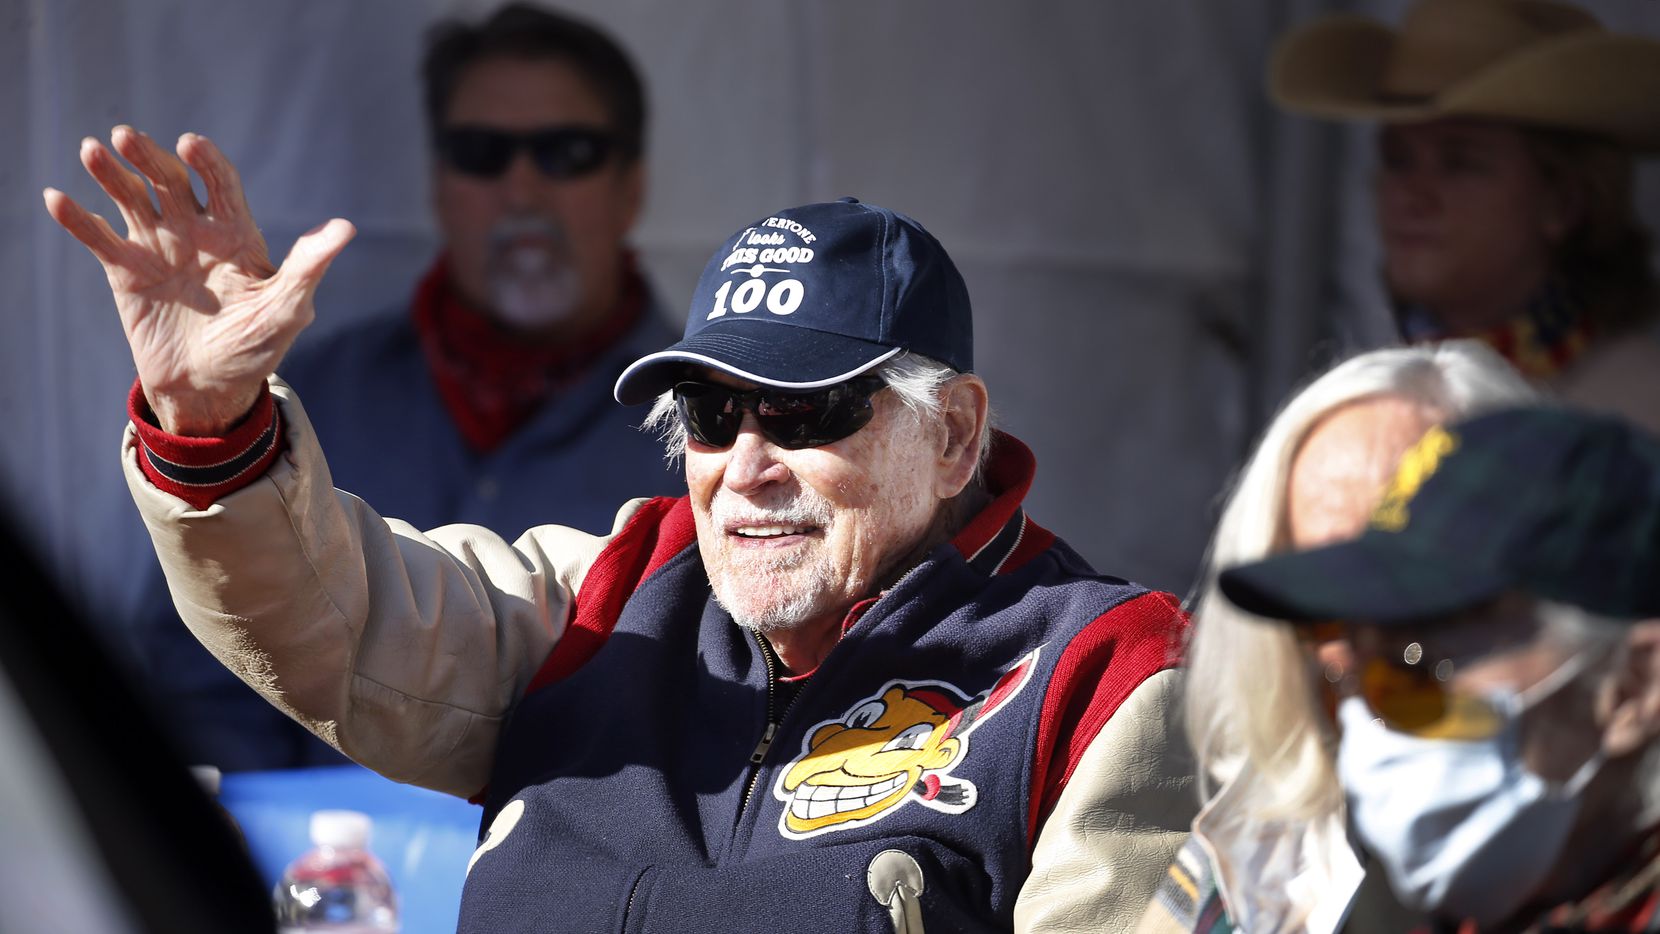 Eddie Robinson, the oldest living former MLB player, waves to friends who delivery an early...